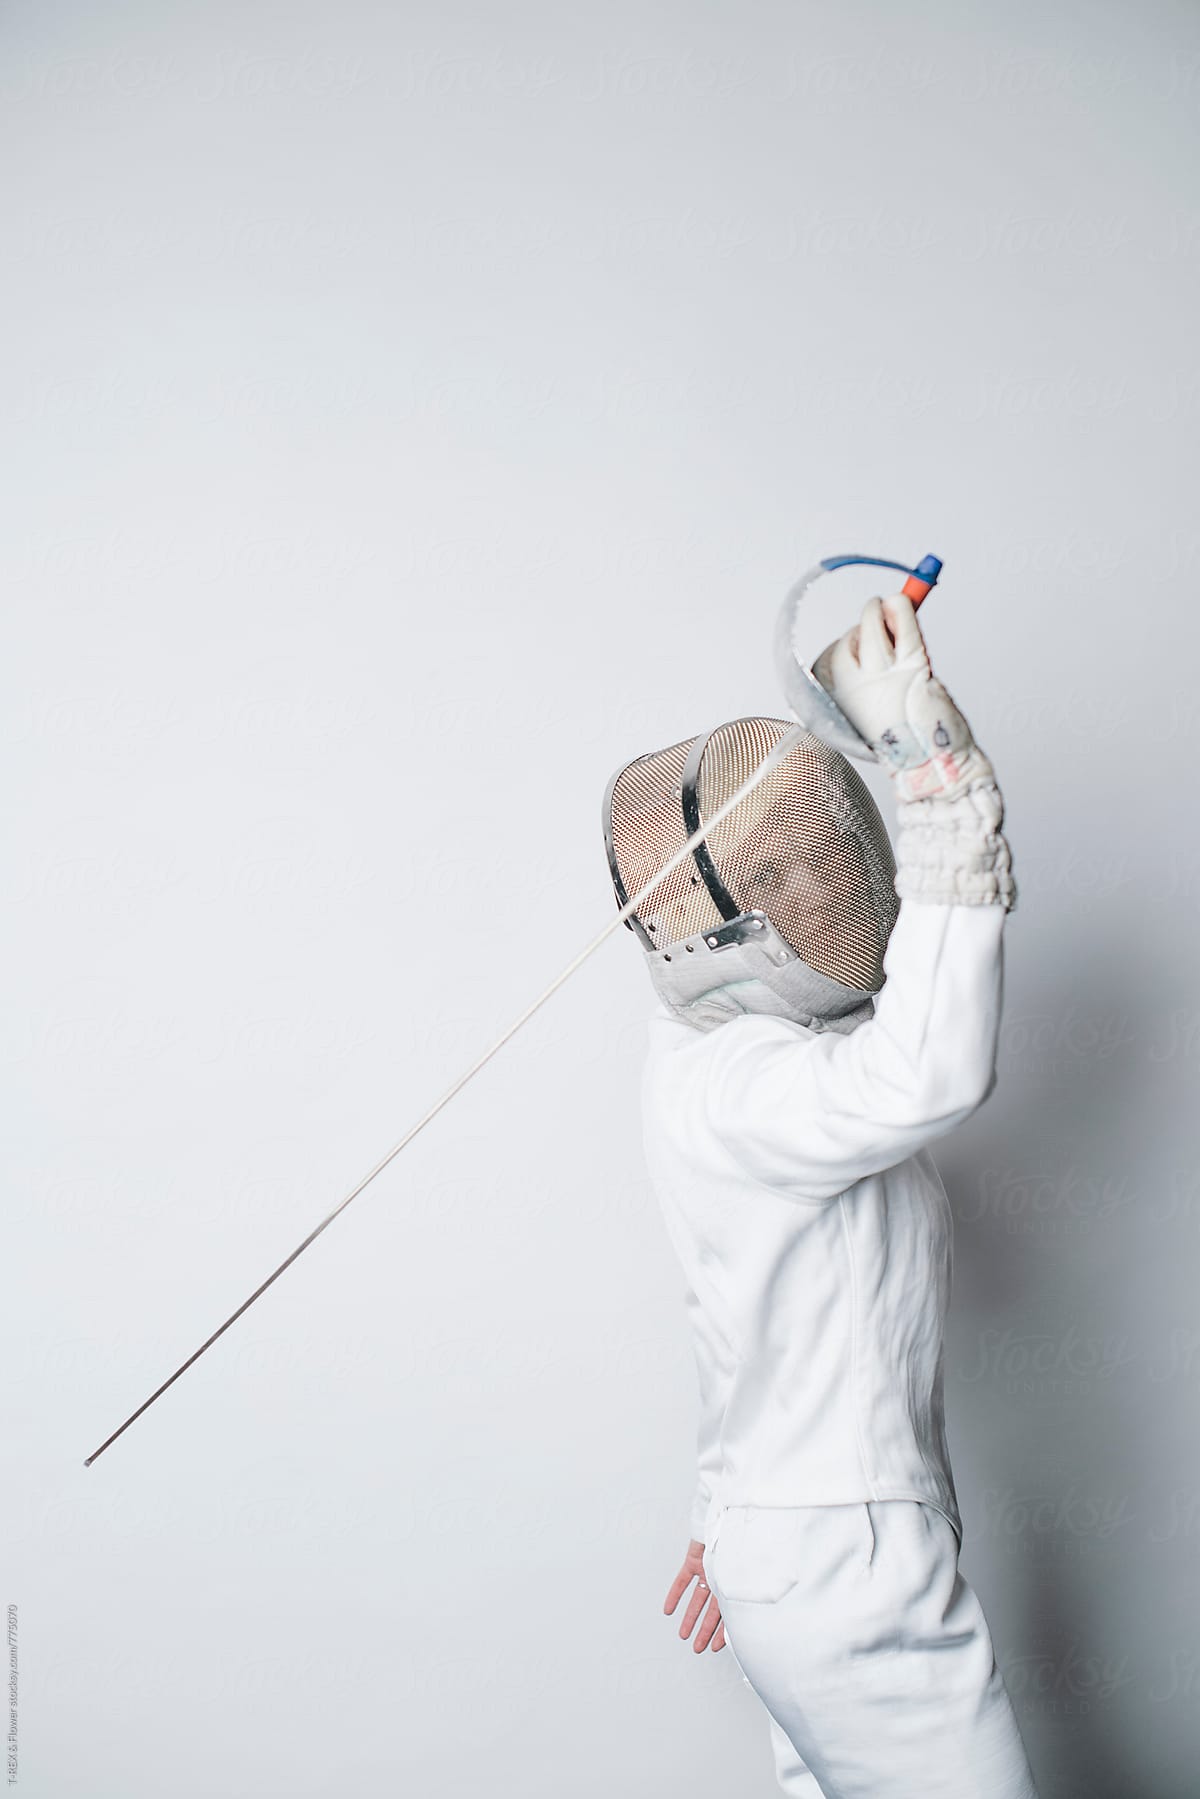 Woman in white fencing costume holding sabre